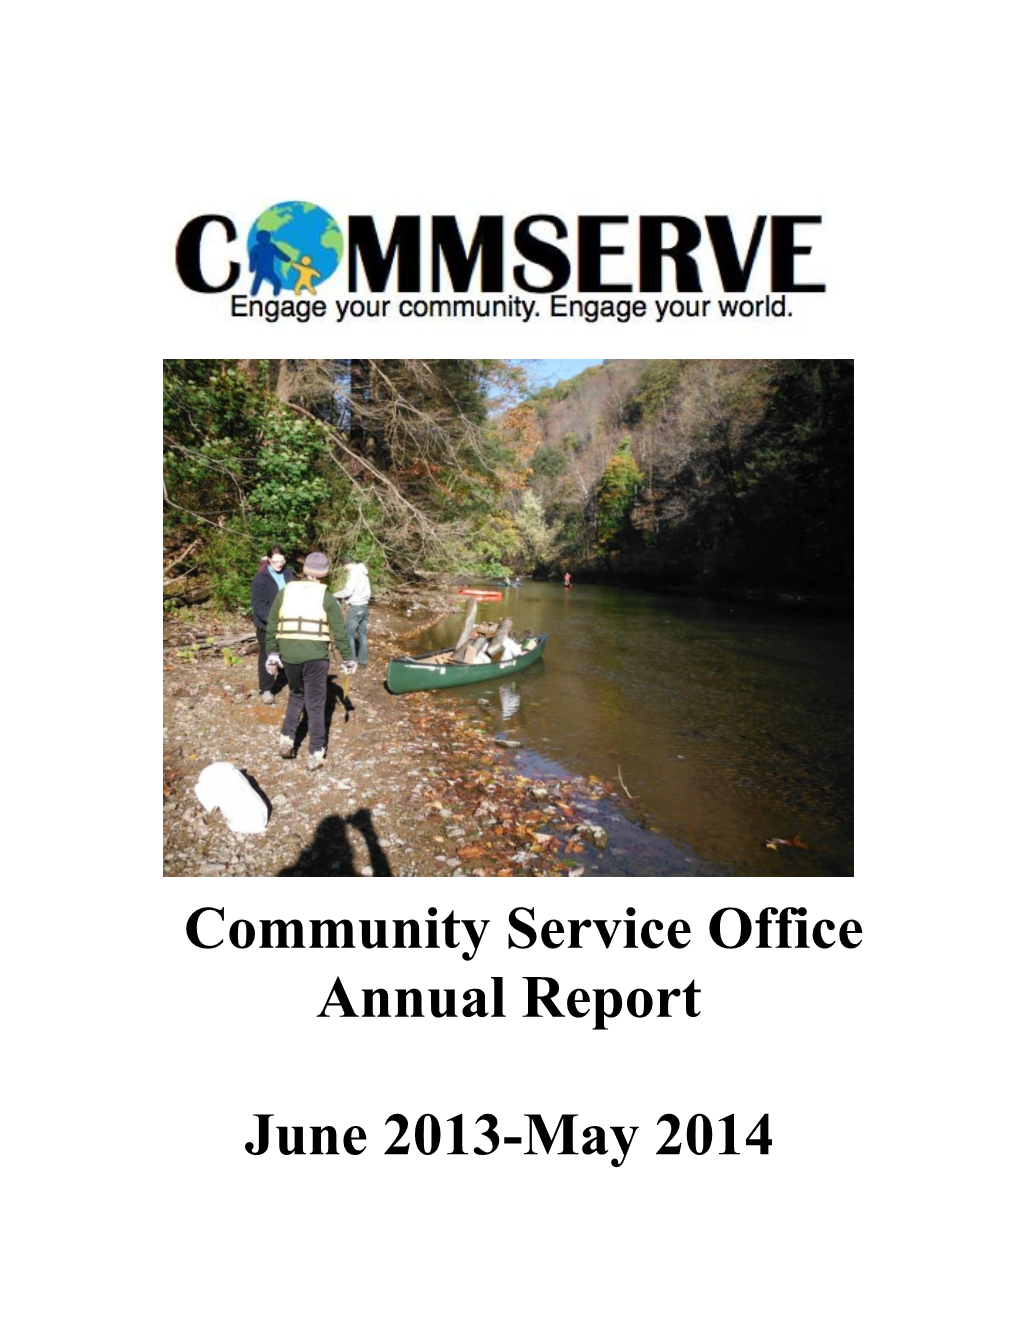 Community Service Office Annual Report June 2013-May 2014